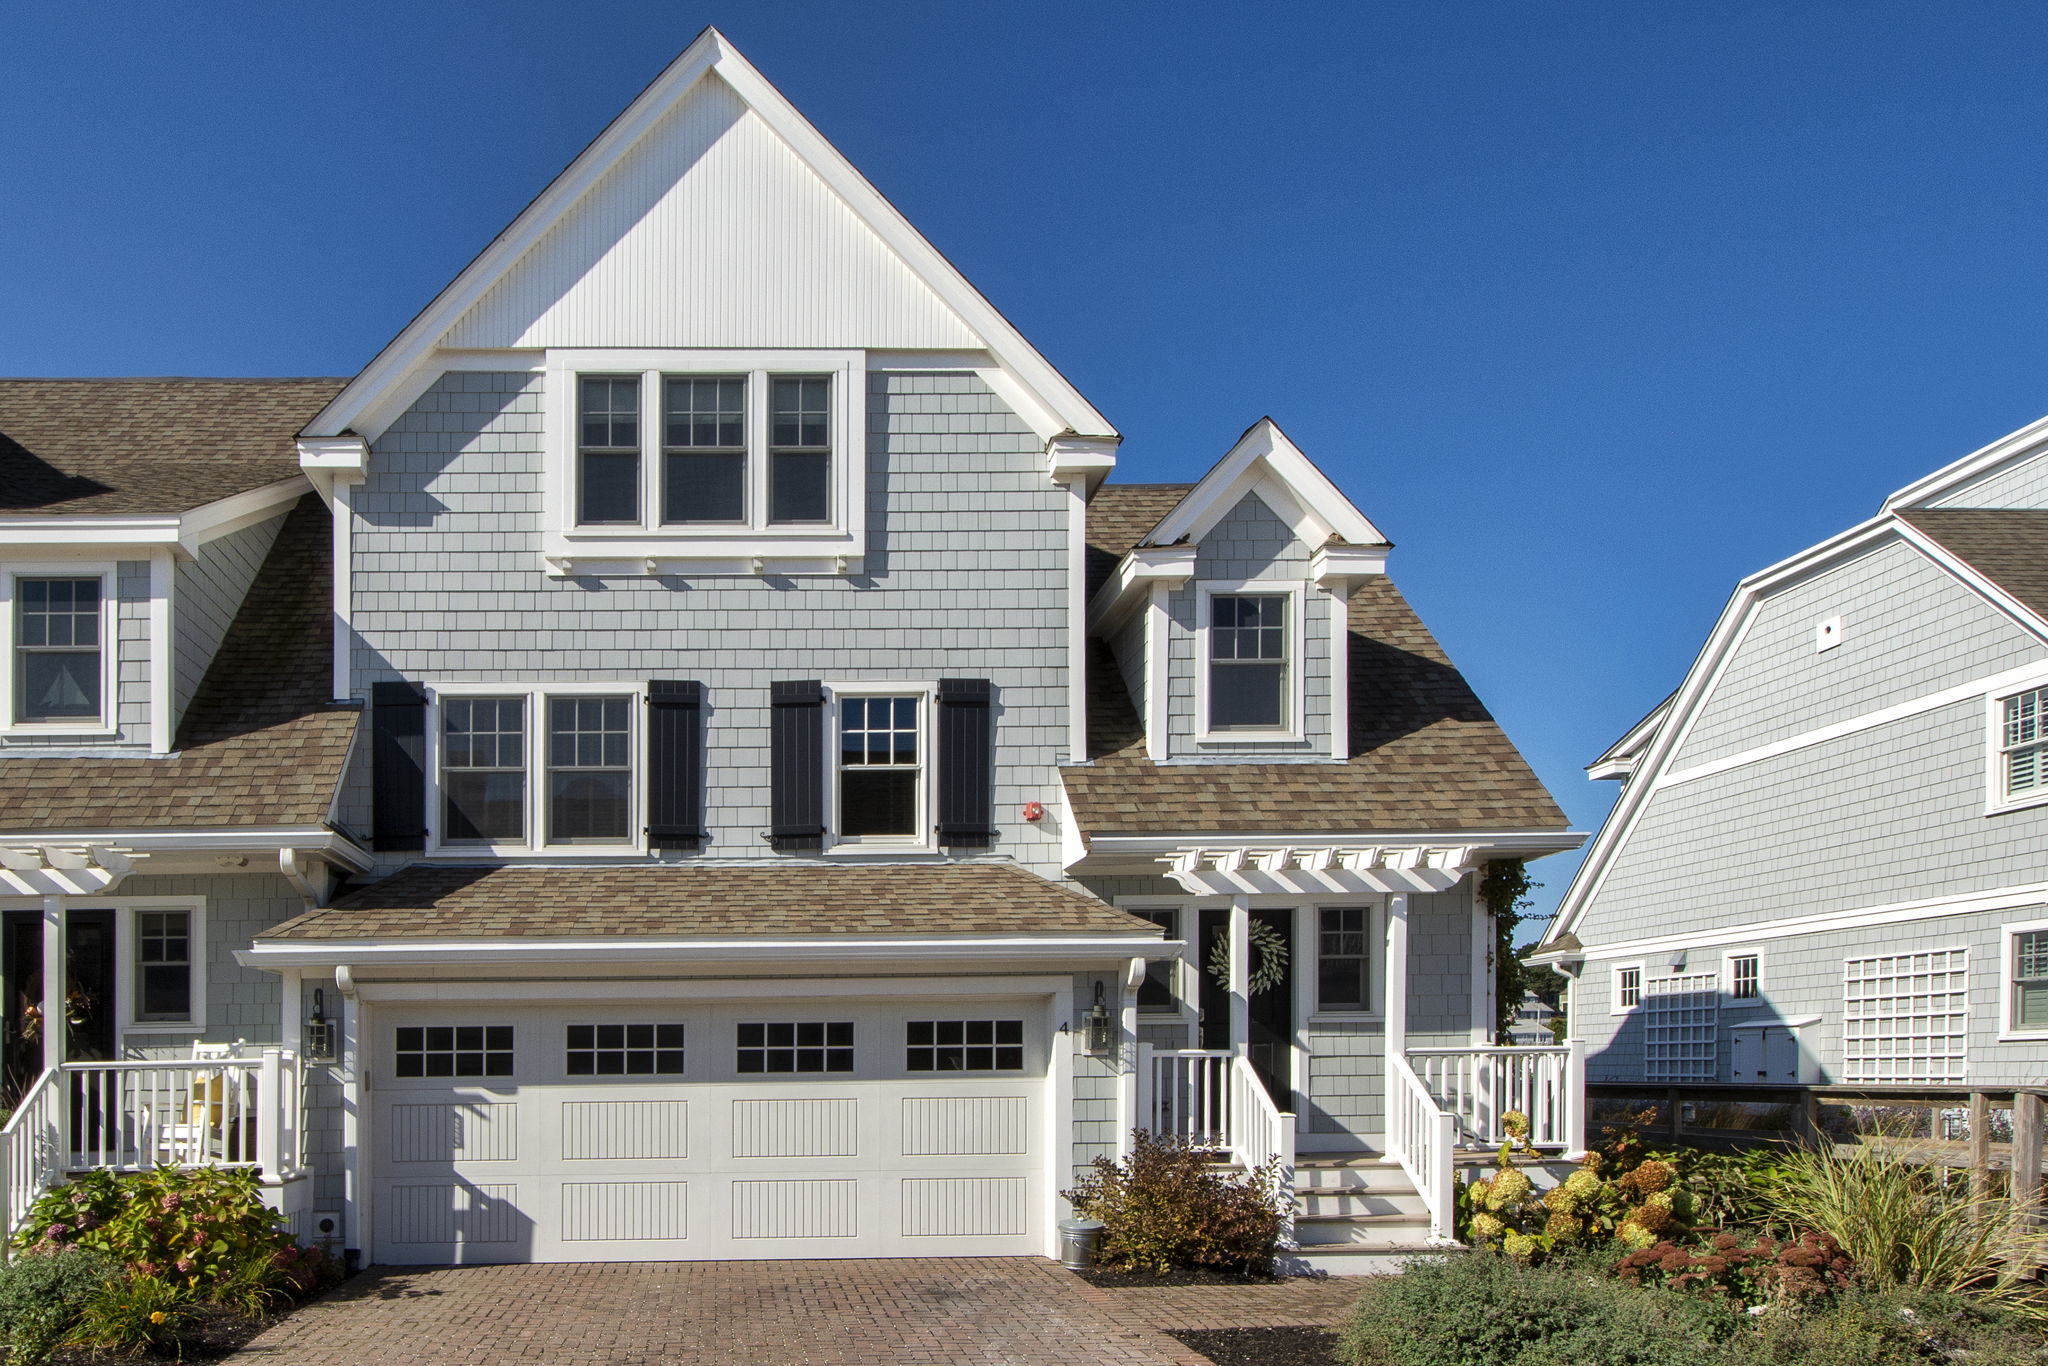  33 Central Ave Unit 4, Scituate, MA 02050, US